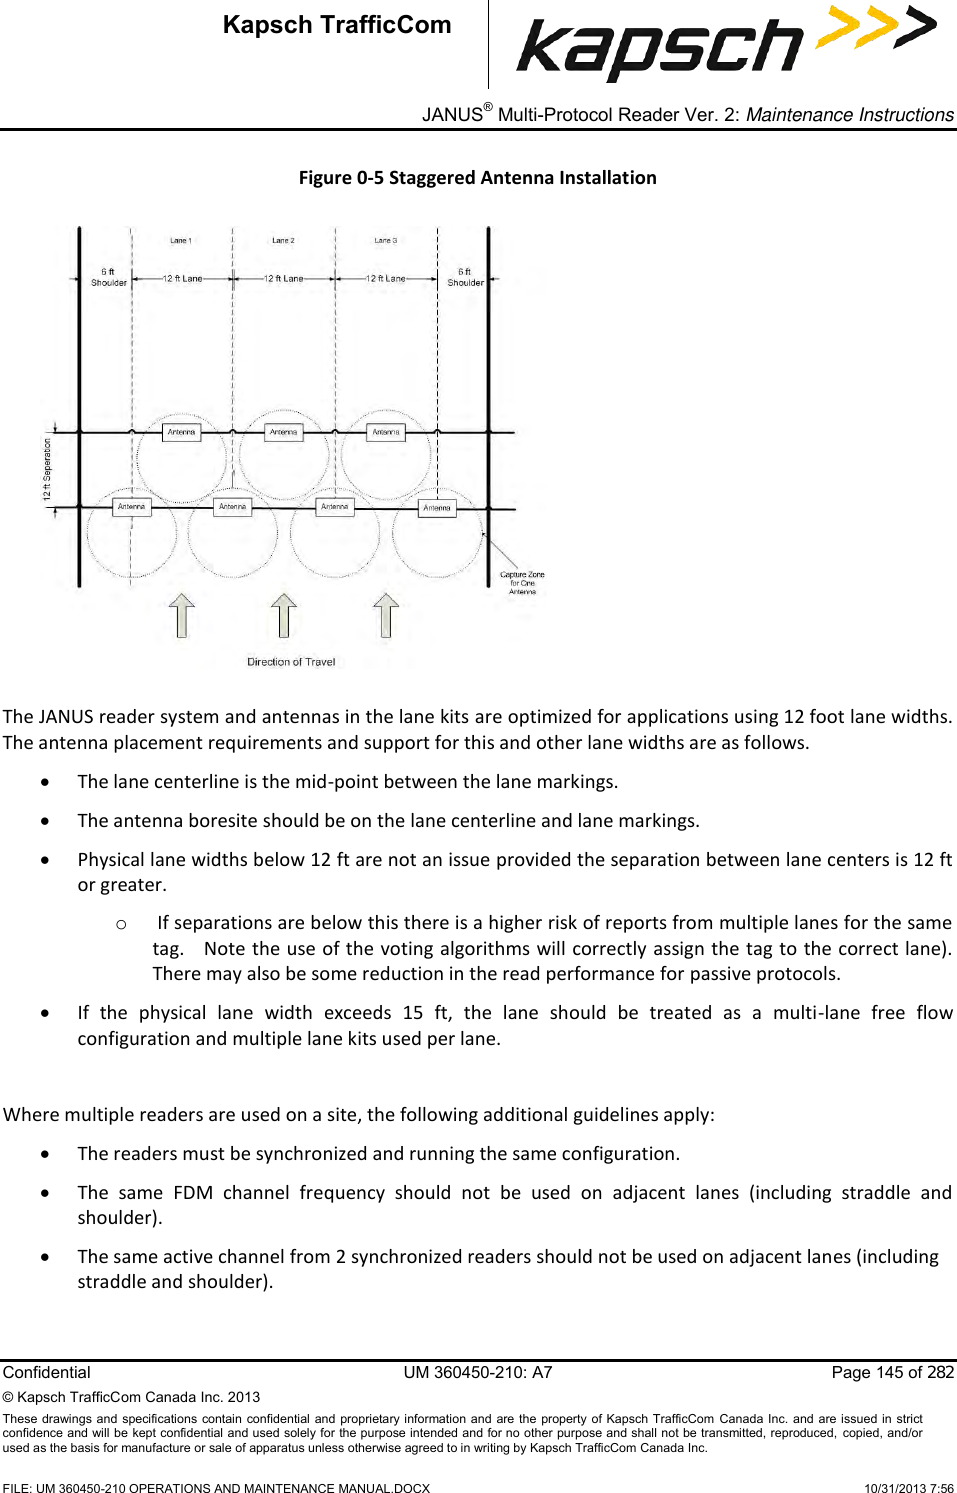 _ JANUS® Multi-Protocol Reader Ver. 2: Maintenance Instructions  Confidential  UM 360450-210: A7  Page 145 of 282 © Kapsch TrafficCom Canada Inc. 2013 These  drawings and specifications  contain confidential and proprietary information and are the property of Kapsch TrafficCom  Canada Inc.  and are issued in strict confidence and will be kept confidential and used solely for the purpose intended and for no other purpose and shall not be transmitted, reproduced, copied, and/or used as the basis for manufacture or sale of apparatus unless otherwise agreed to in writing by Kapsch TrafficCom Canada Inc.    FILE: UM 360450-210 OPERATIONS AND MAINTENANCE MANUAL.DOCX    10/31/2013 7:56 Kapsch TrafficCom Figure 0-5 Staggered Antenna Installation    The JANUS reader system and antennas in the lane kits are optimized for applications using 12 foot lane widths.   The antenna placement requirements and support for this and other lane widths are as follows.  The lane centerline is the mid-point between the lane markings.  The antenna boresite should be on the lane centerline and lane markings.  Physical lane widths below 12 ft are not an issue provided the separation between lane centers is 12 ft or greater. o  If separations are below this there is a higher risk of reports from multiple lanes for the same tag.   Note the use of the voting algorithms will correctly assign the tag to the correct lane).  There may also be some reduction in the read performance for passive protocols.  If  the  physical  lane  width  exceeds  15  ft,  the  lane  should  be  treated  as  a  multi-lane  free  flow configuration and multiple lane kits used per lane.  Where multiple readers are used on a site, the following additional guidelines apply:  The readers must be synchronized and running the same configuration.  The  same  FDM  channel  frequency  should  not  be  used  on  adjacent  lanes  (including  straddle  and shoulder).  The same active channel from 2 synchronized readers should not be used on adjacent lanes (including straddle and shoulder).  